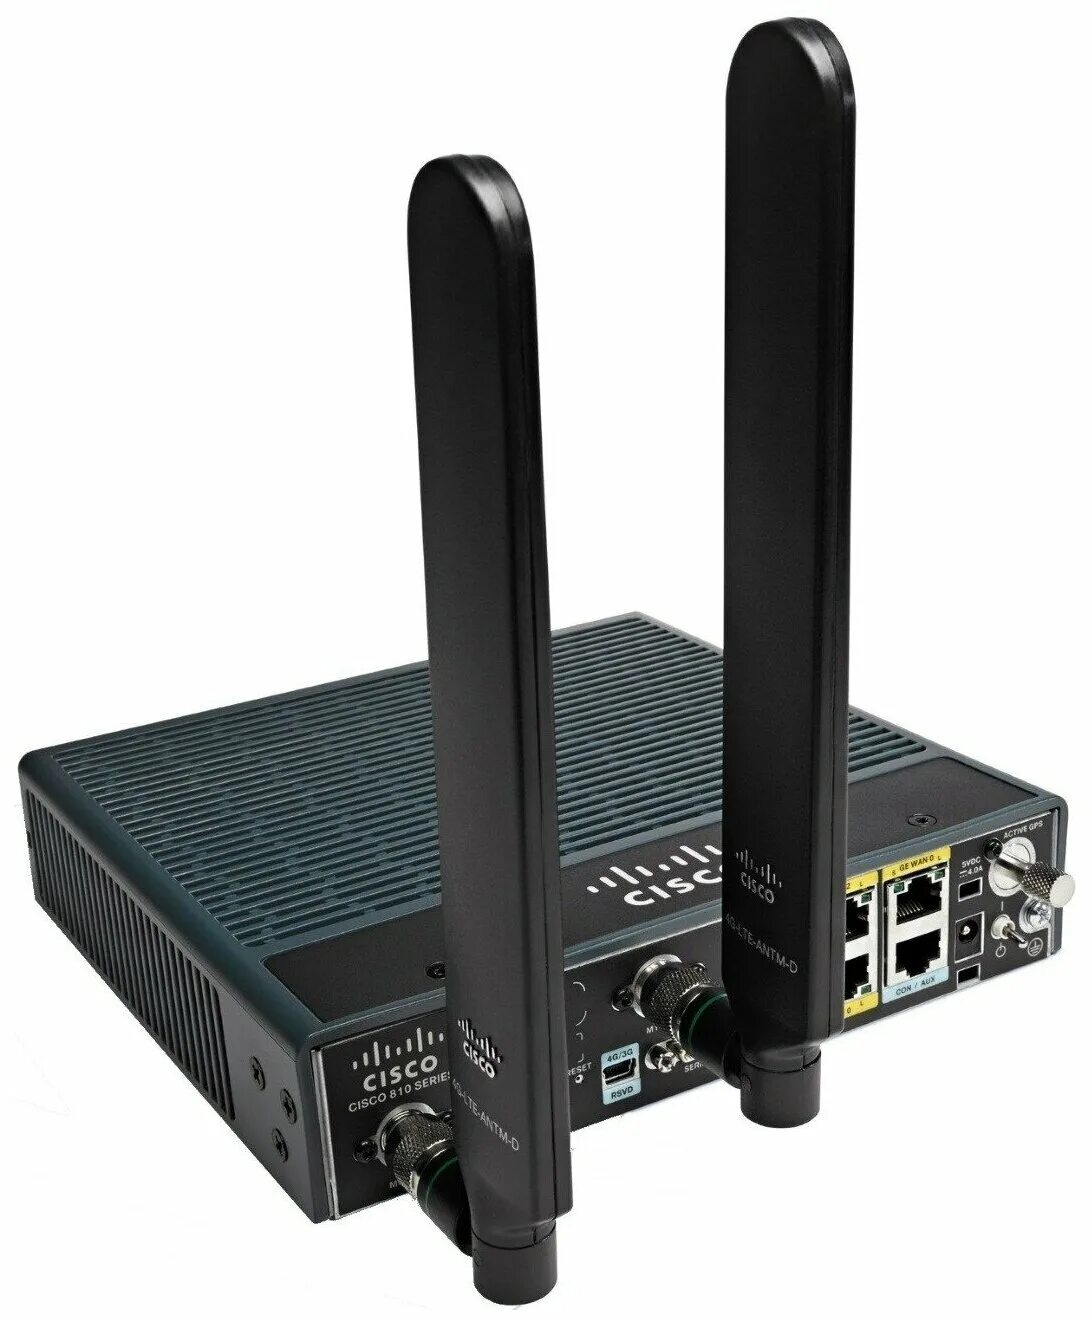 Cisco 4g. Cisco c819g+7-k9. Cisco c819-4g-g-k9. Cisco 857. Cisco LTE Router.